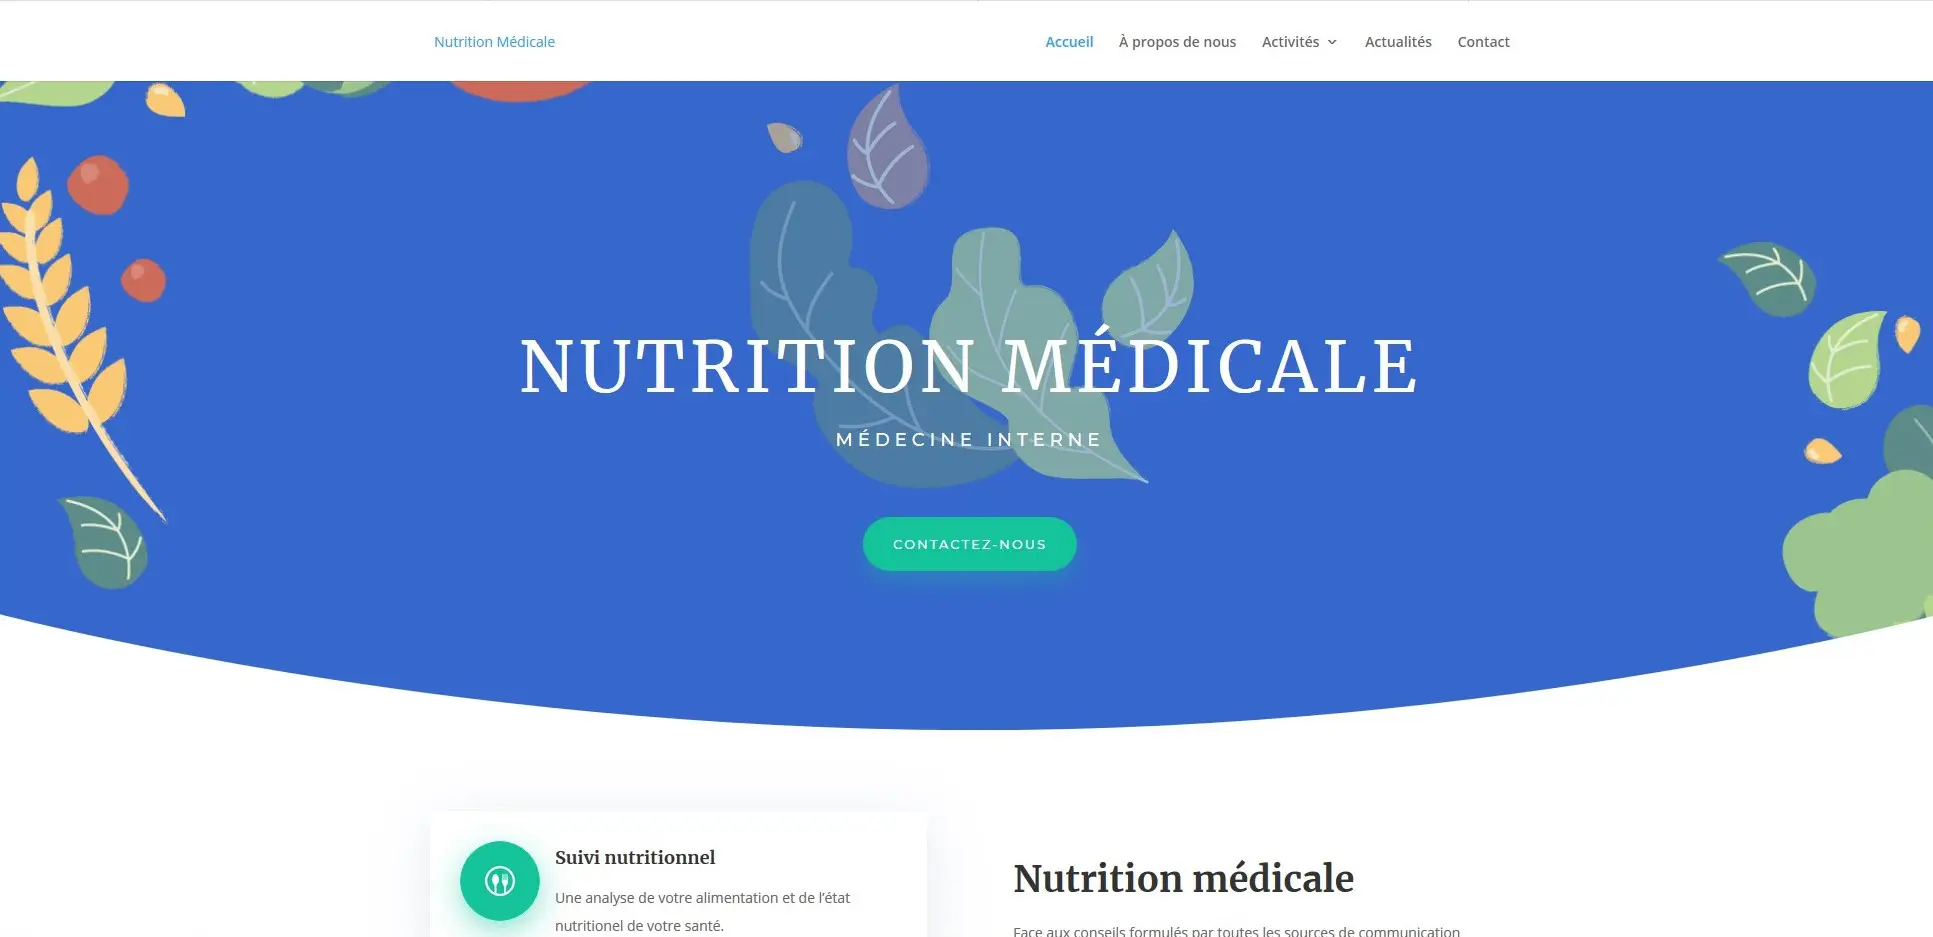 Nutrition medicale